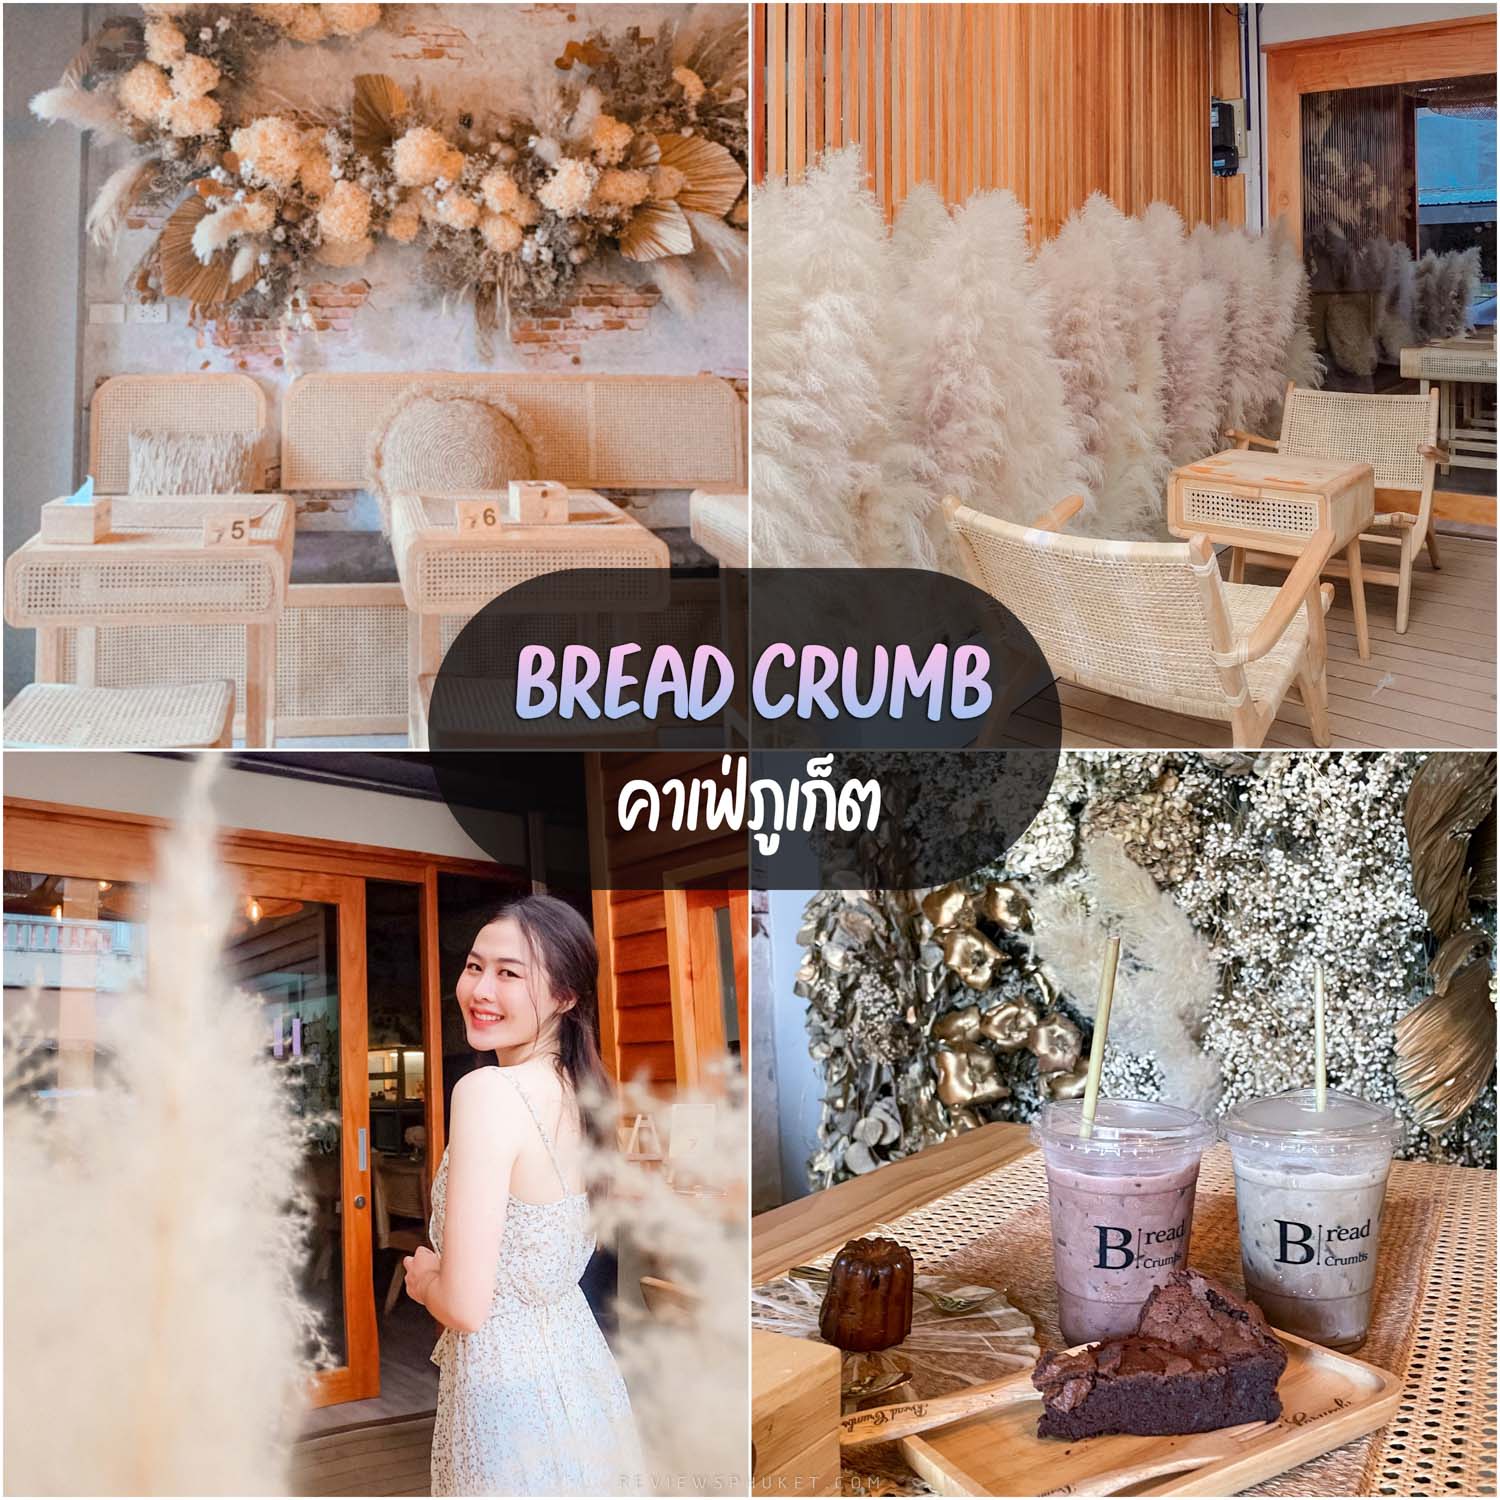 Bread crumbs Cafe Phuket cafe, cute decorations, delicious bakery drinks.